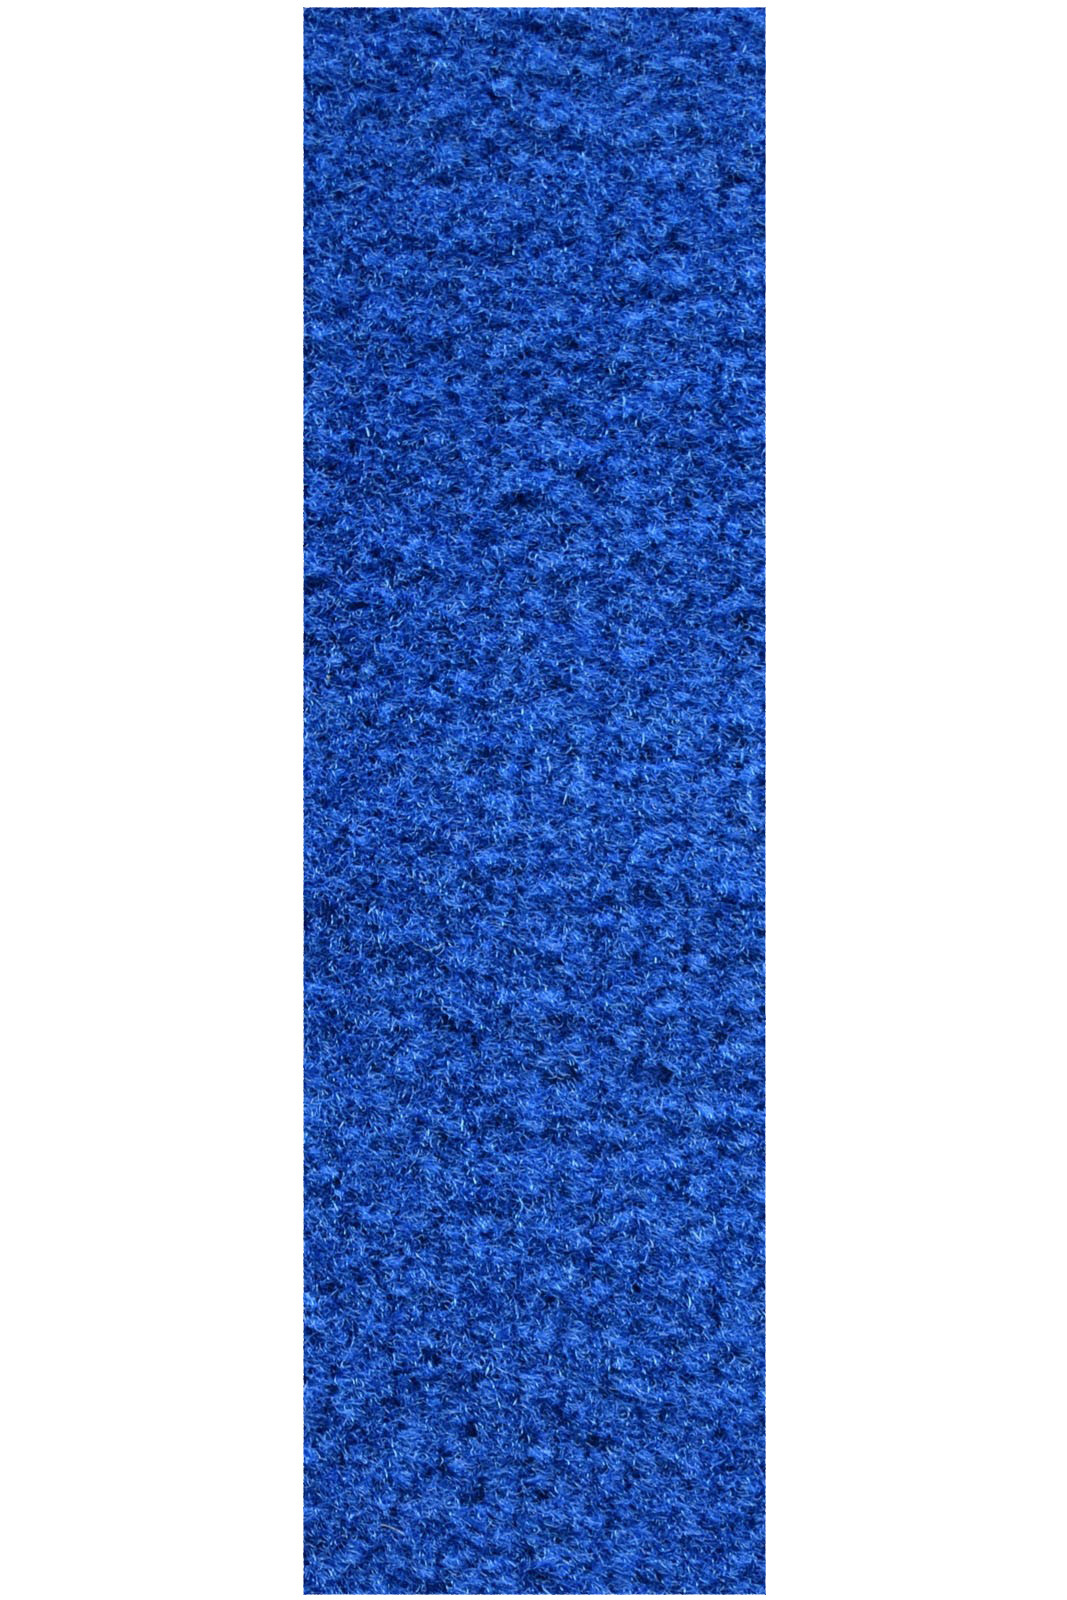 Commercial Indoor/Outdoor Blue Custom Size Runner 2'6" x10' - Area Rug with Rubber Marine Backing for Patio, Porch, Deck, Boat, Basement or Garage with Premium Bound Polyester Edges - image 1 of 1